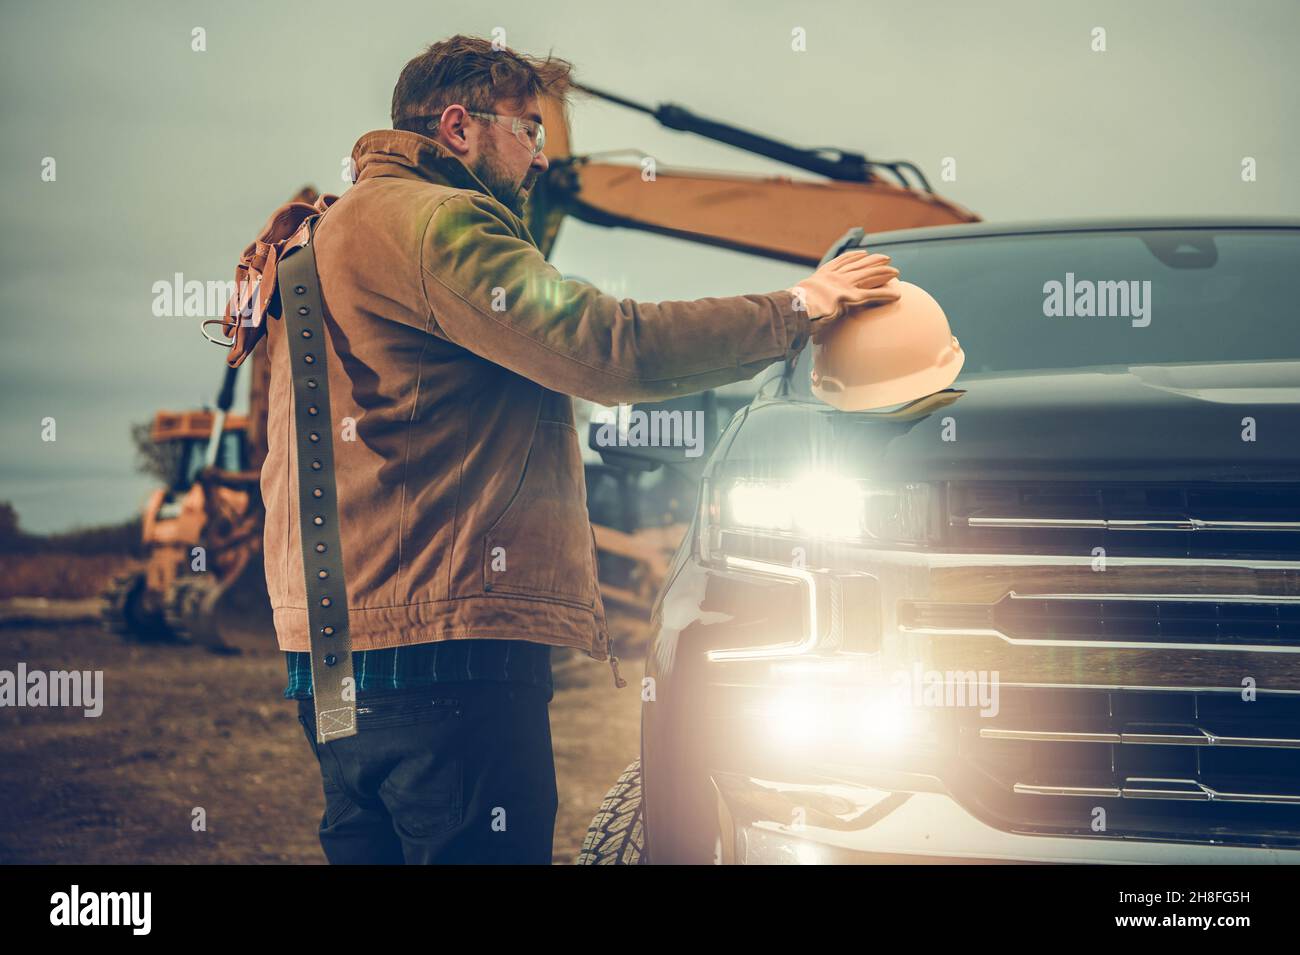 Ground Works Contractor Worker Excavator Operator Next to His Pickup Truck Getting Ready For a Job. Construction Industry Theme. Stock Photo